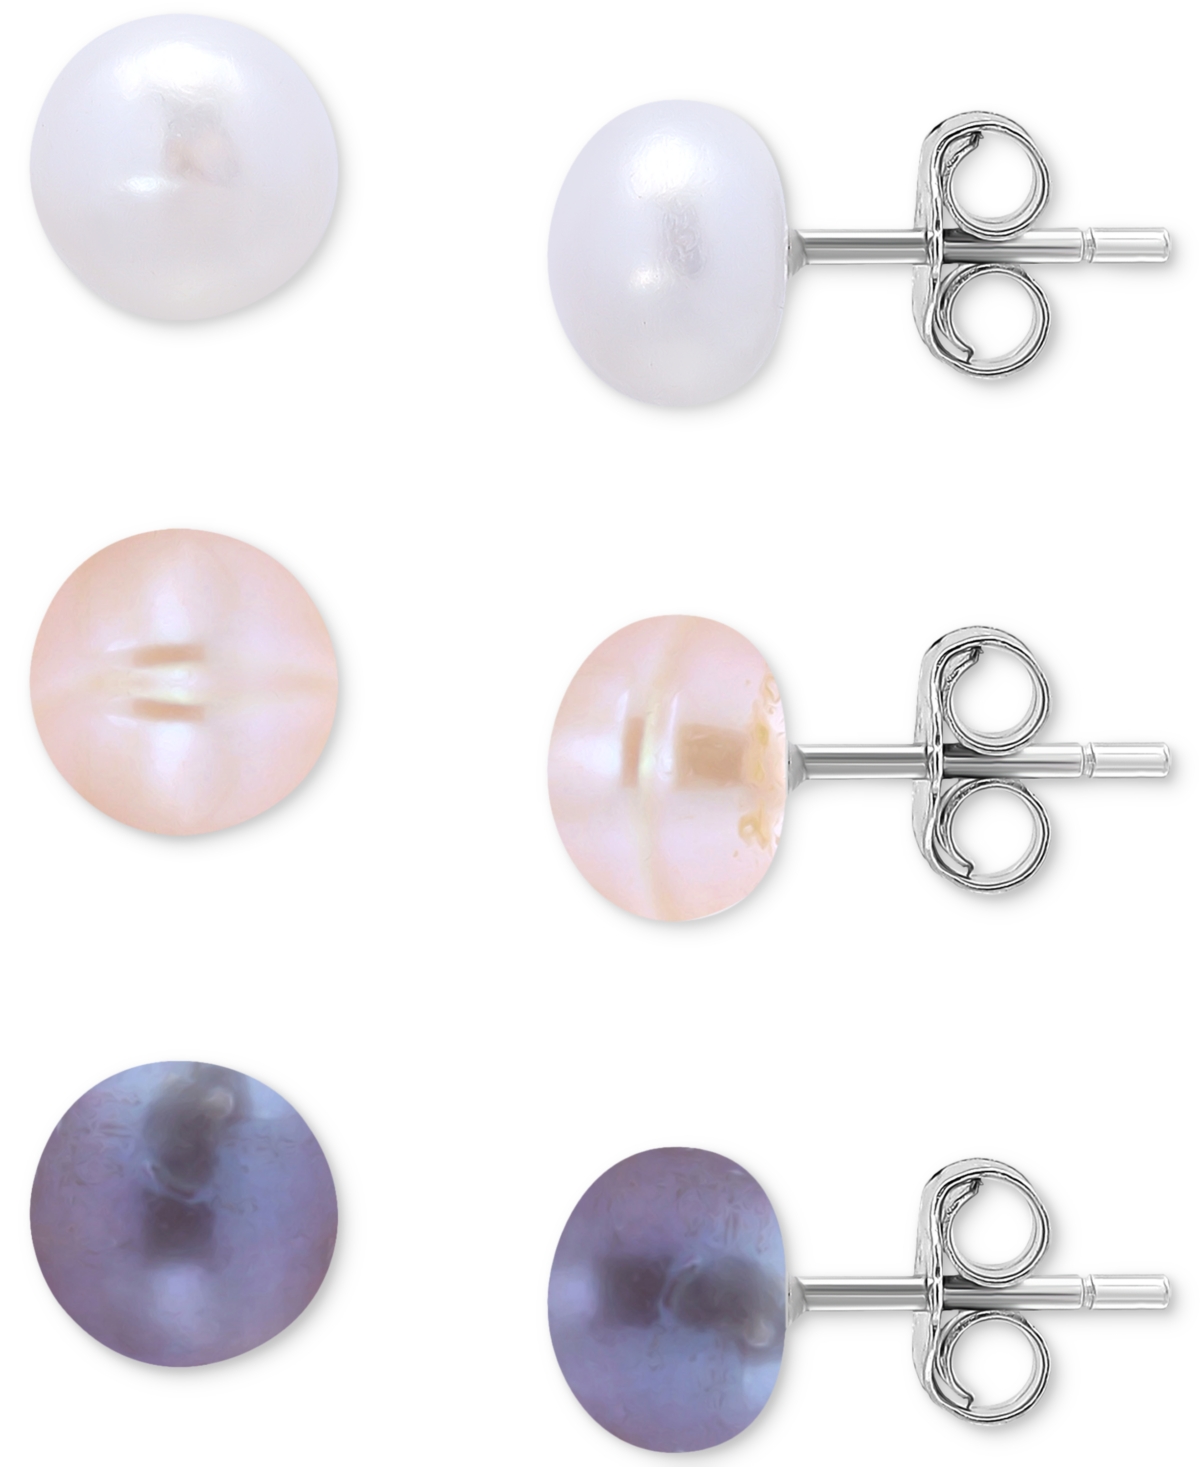 Giani Bernini 3-pc. Set Multicolor Cultured Freshwater Pearl (7mm) Stud Earrings In Sterling Silver, Created For M